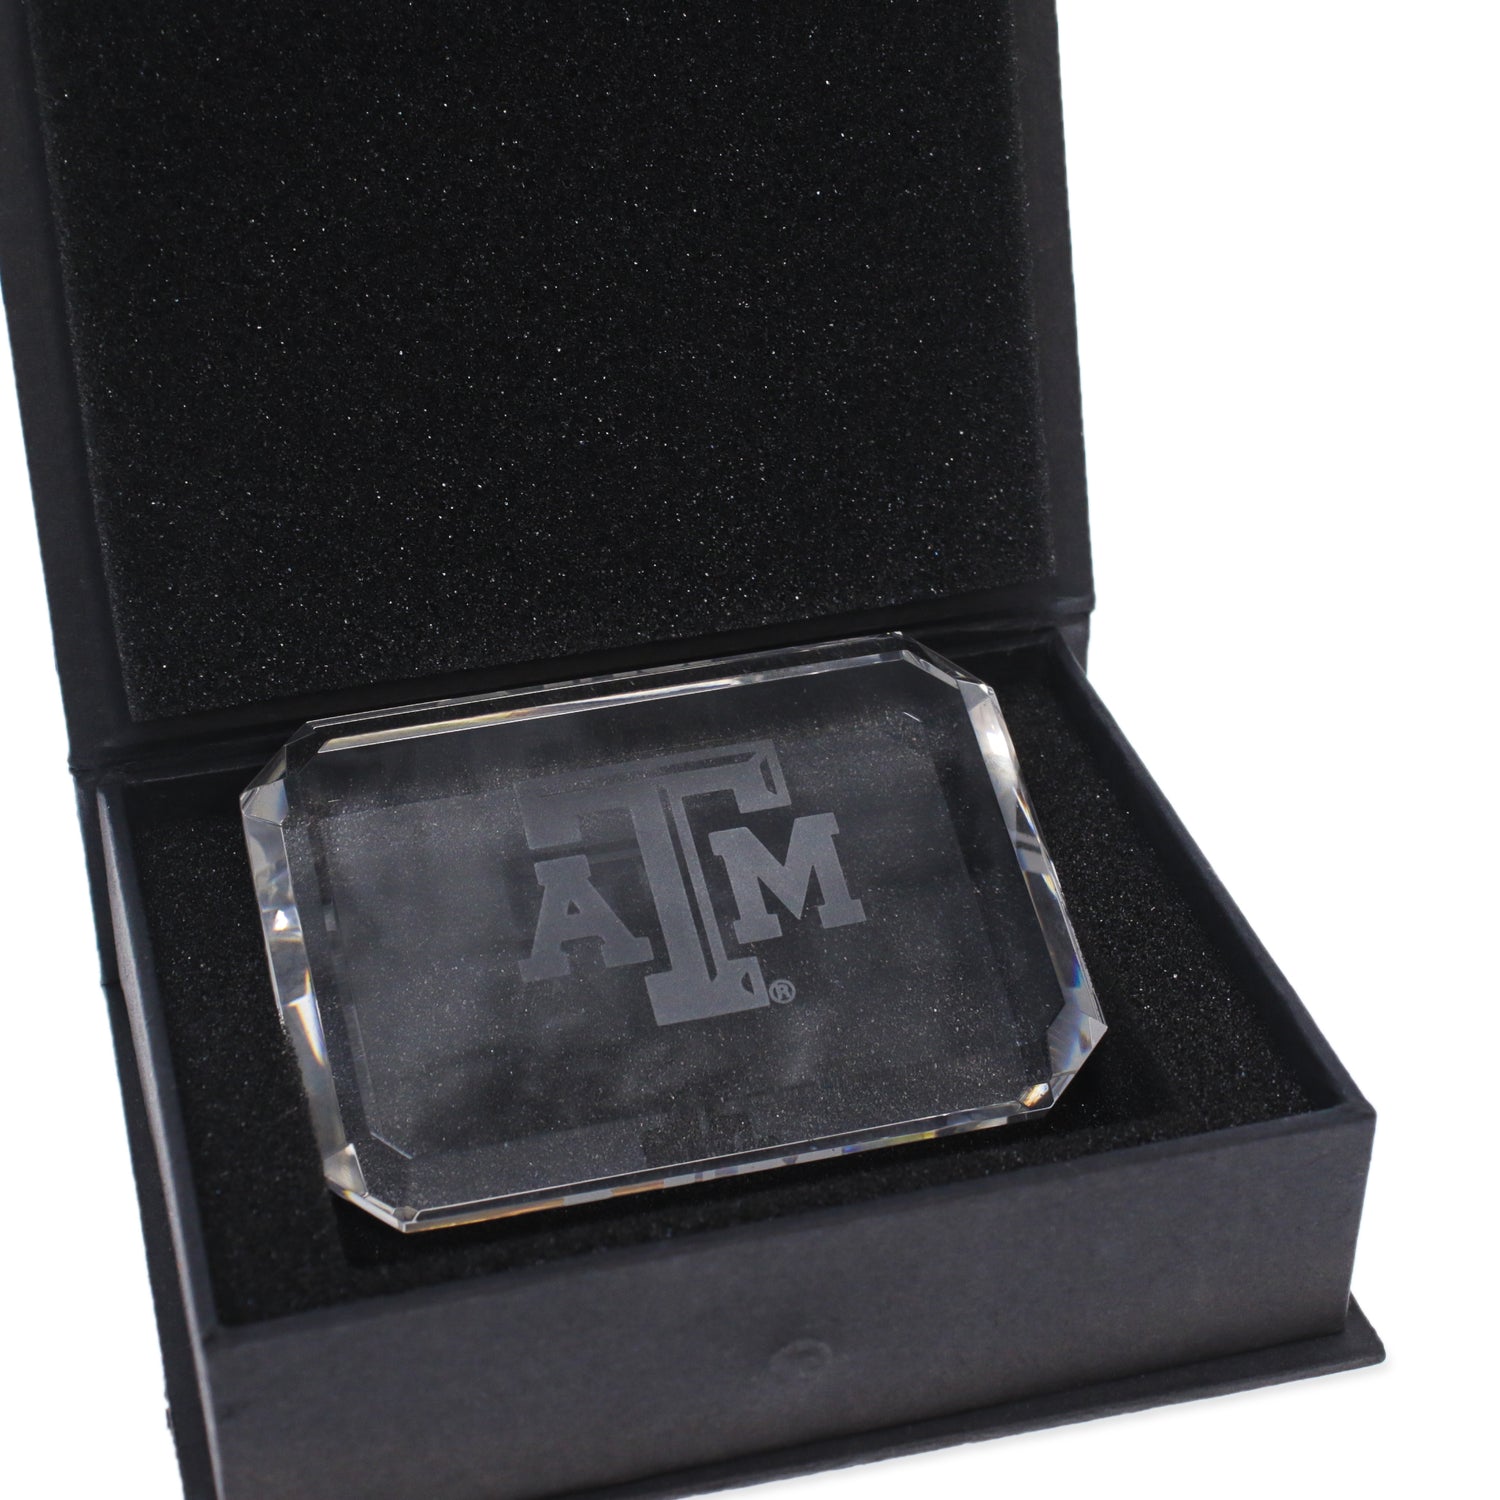 Texas A&M Optic Paperweight